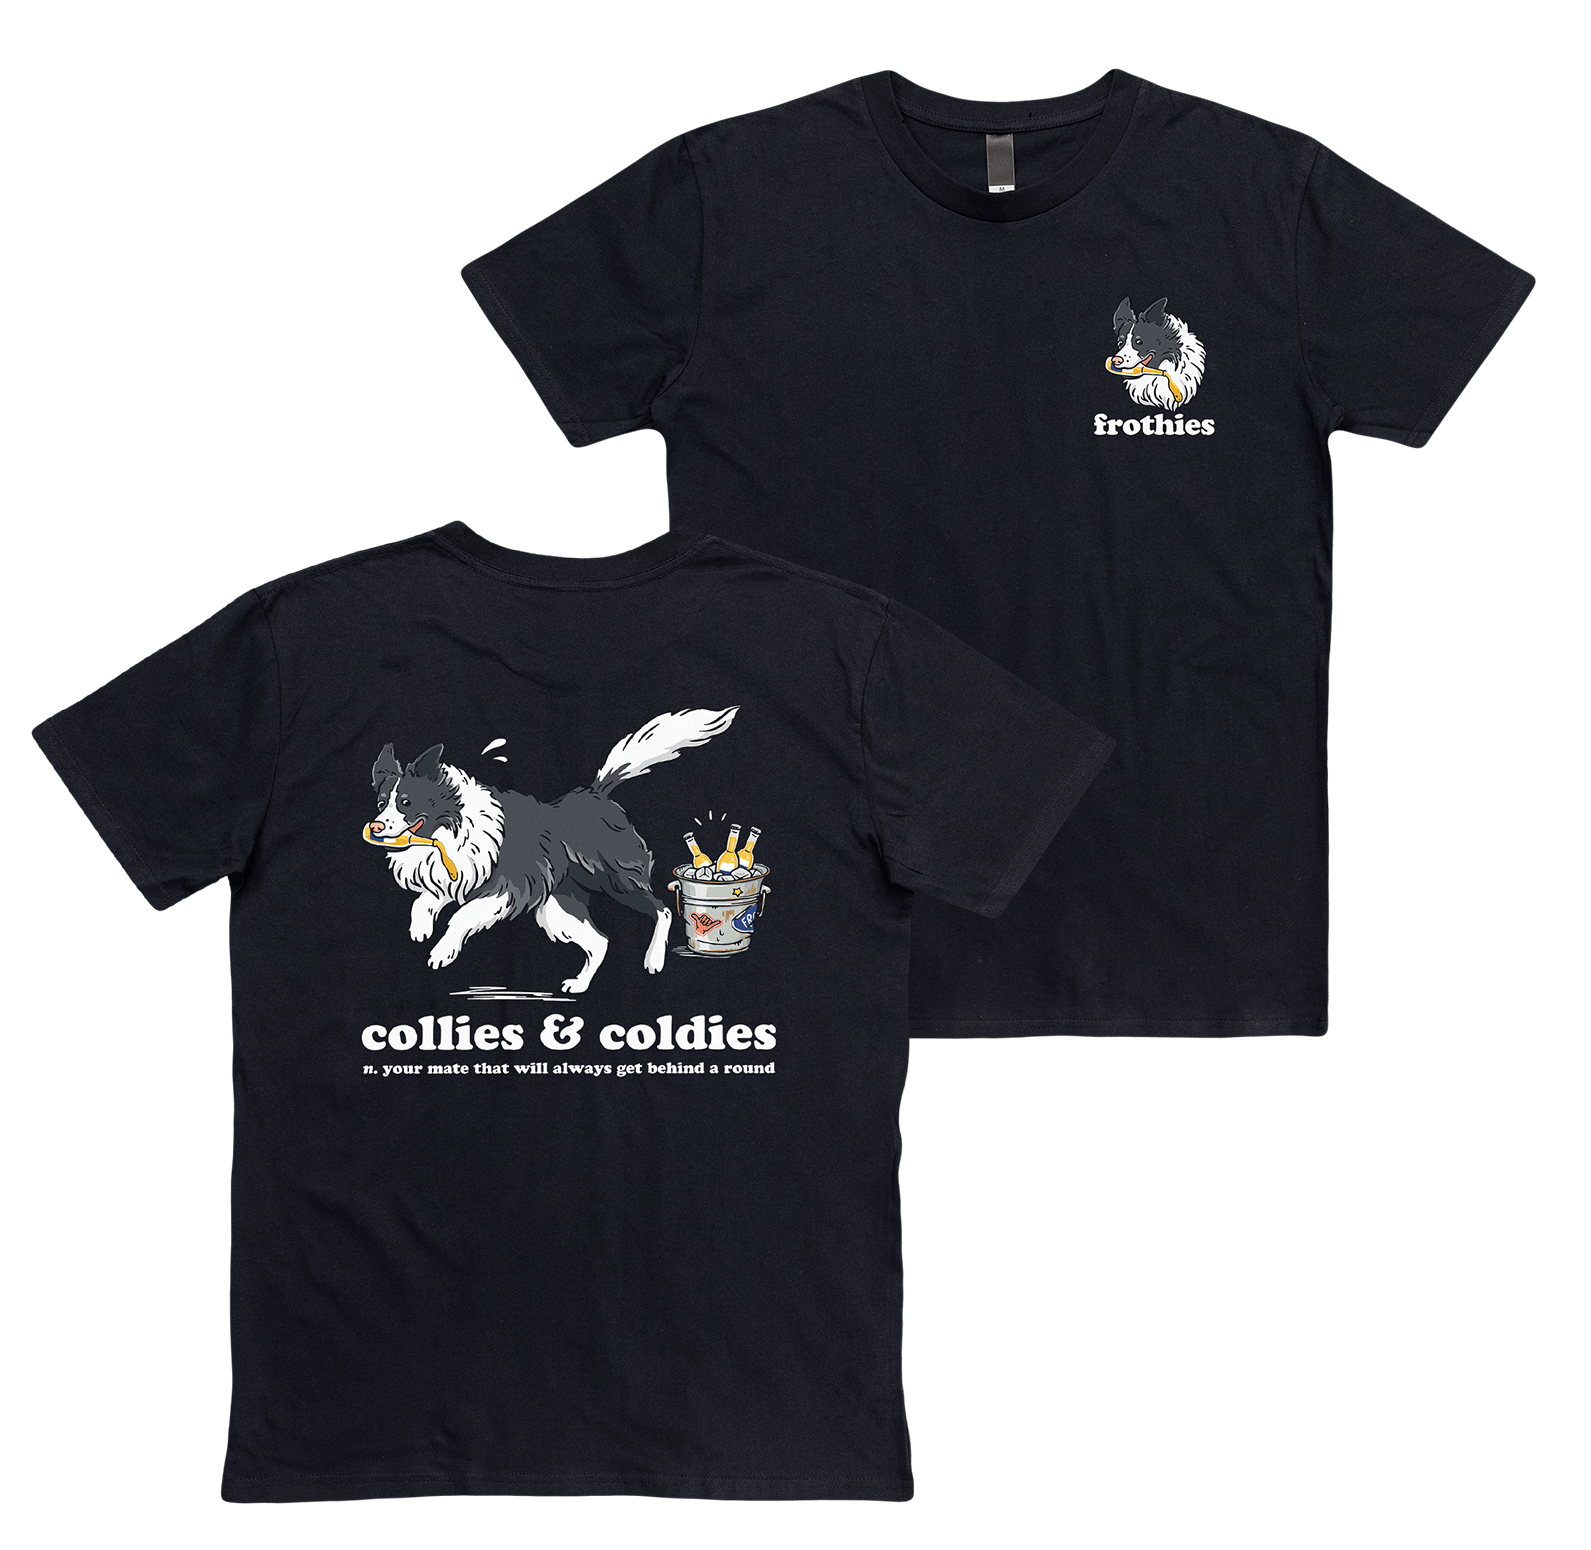 Collies & Coldies Tee T-Shirt Frothies